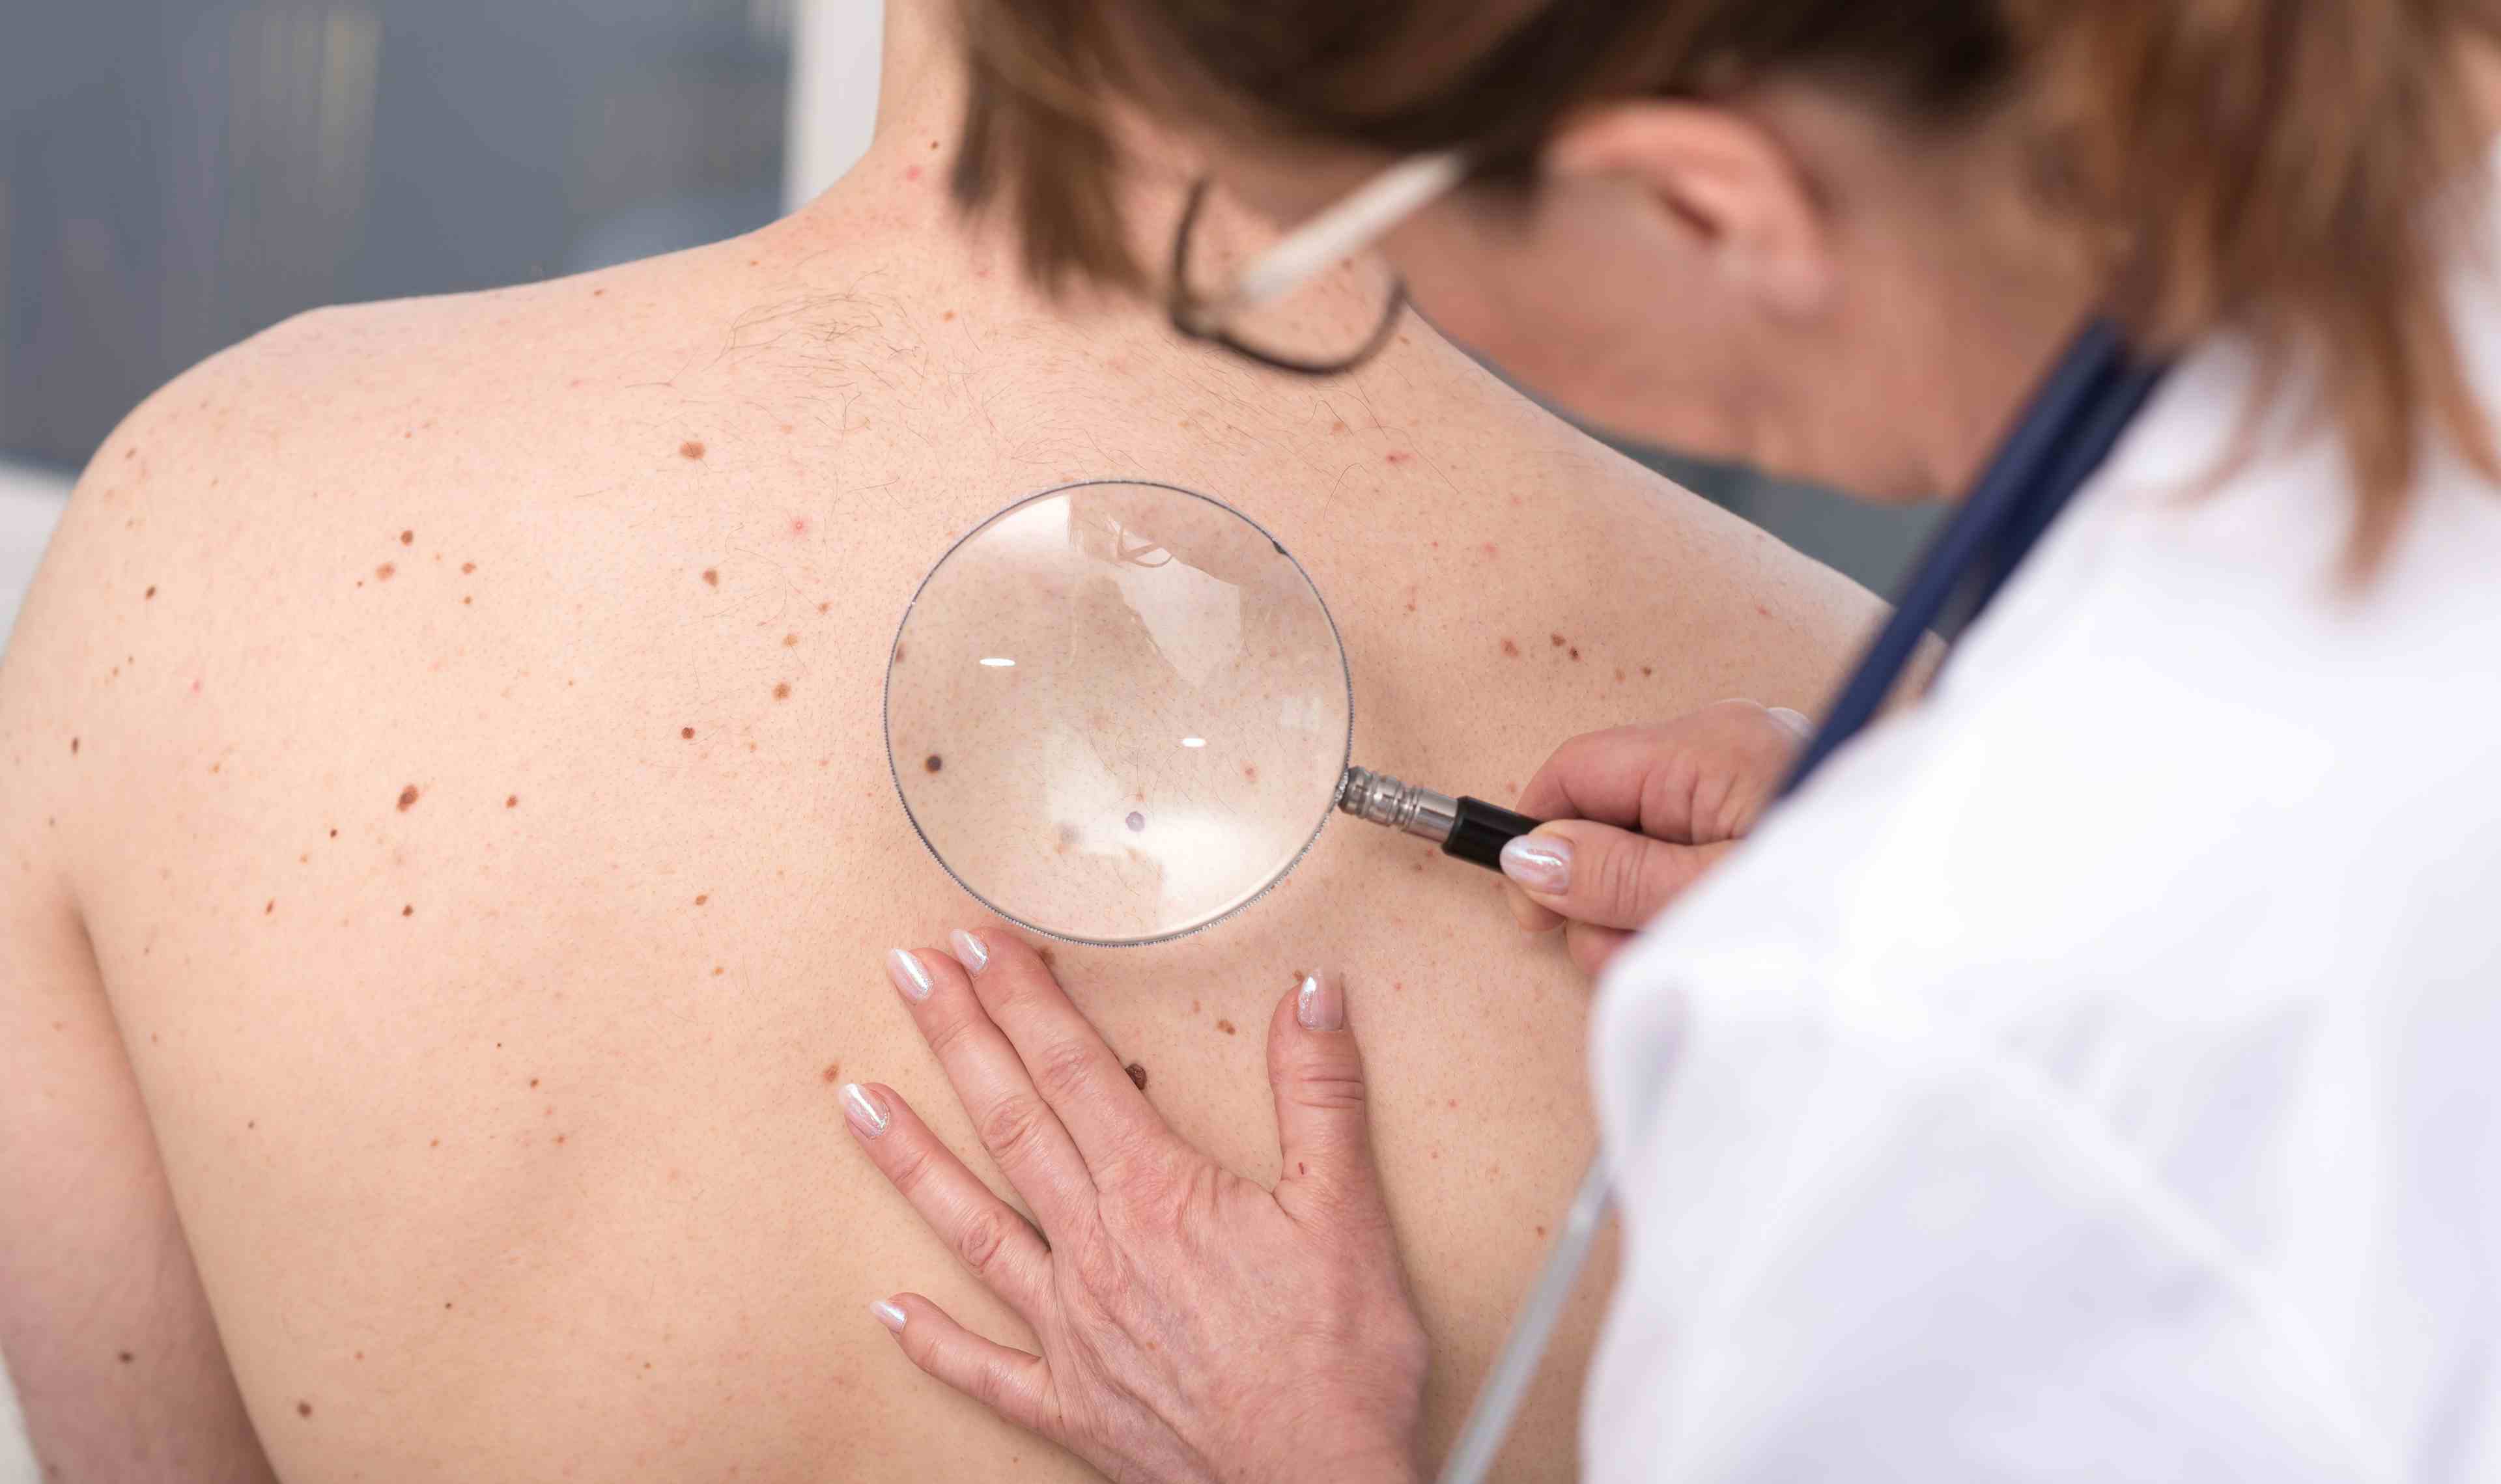 Dermatologist examining the skin of a patient | Image Credit: thodonal - stock.adobe.com